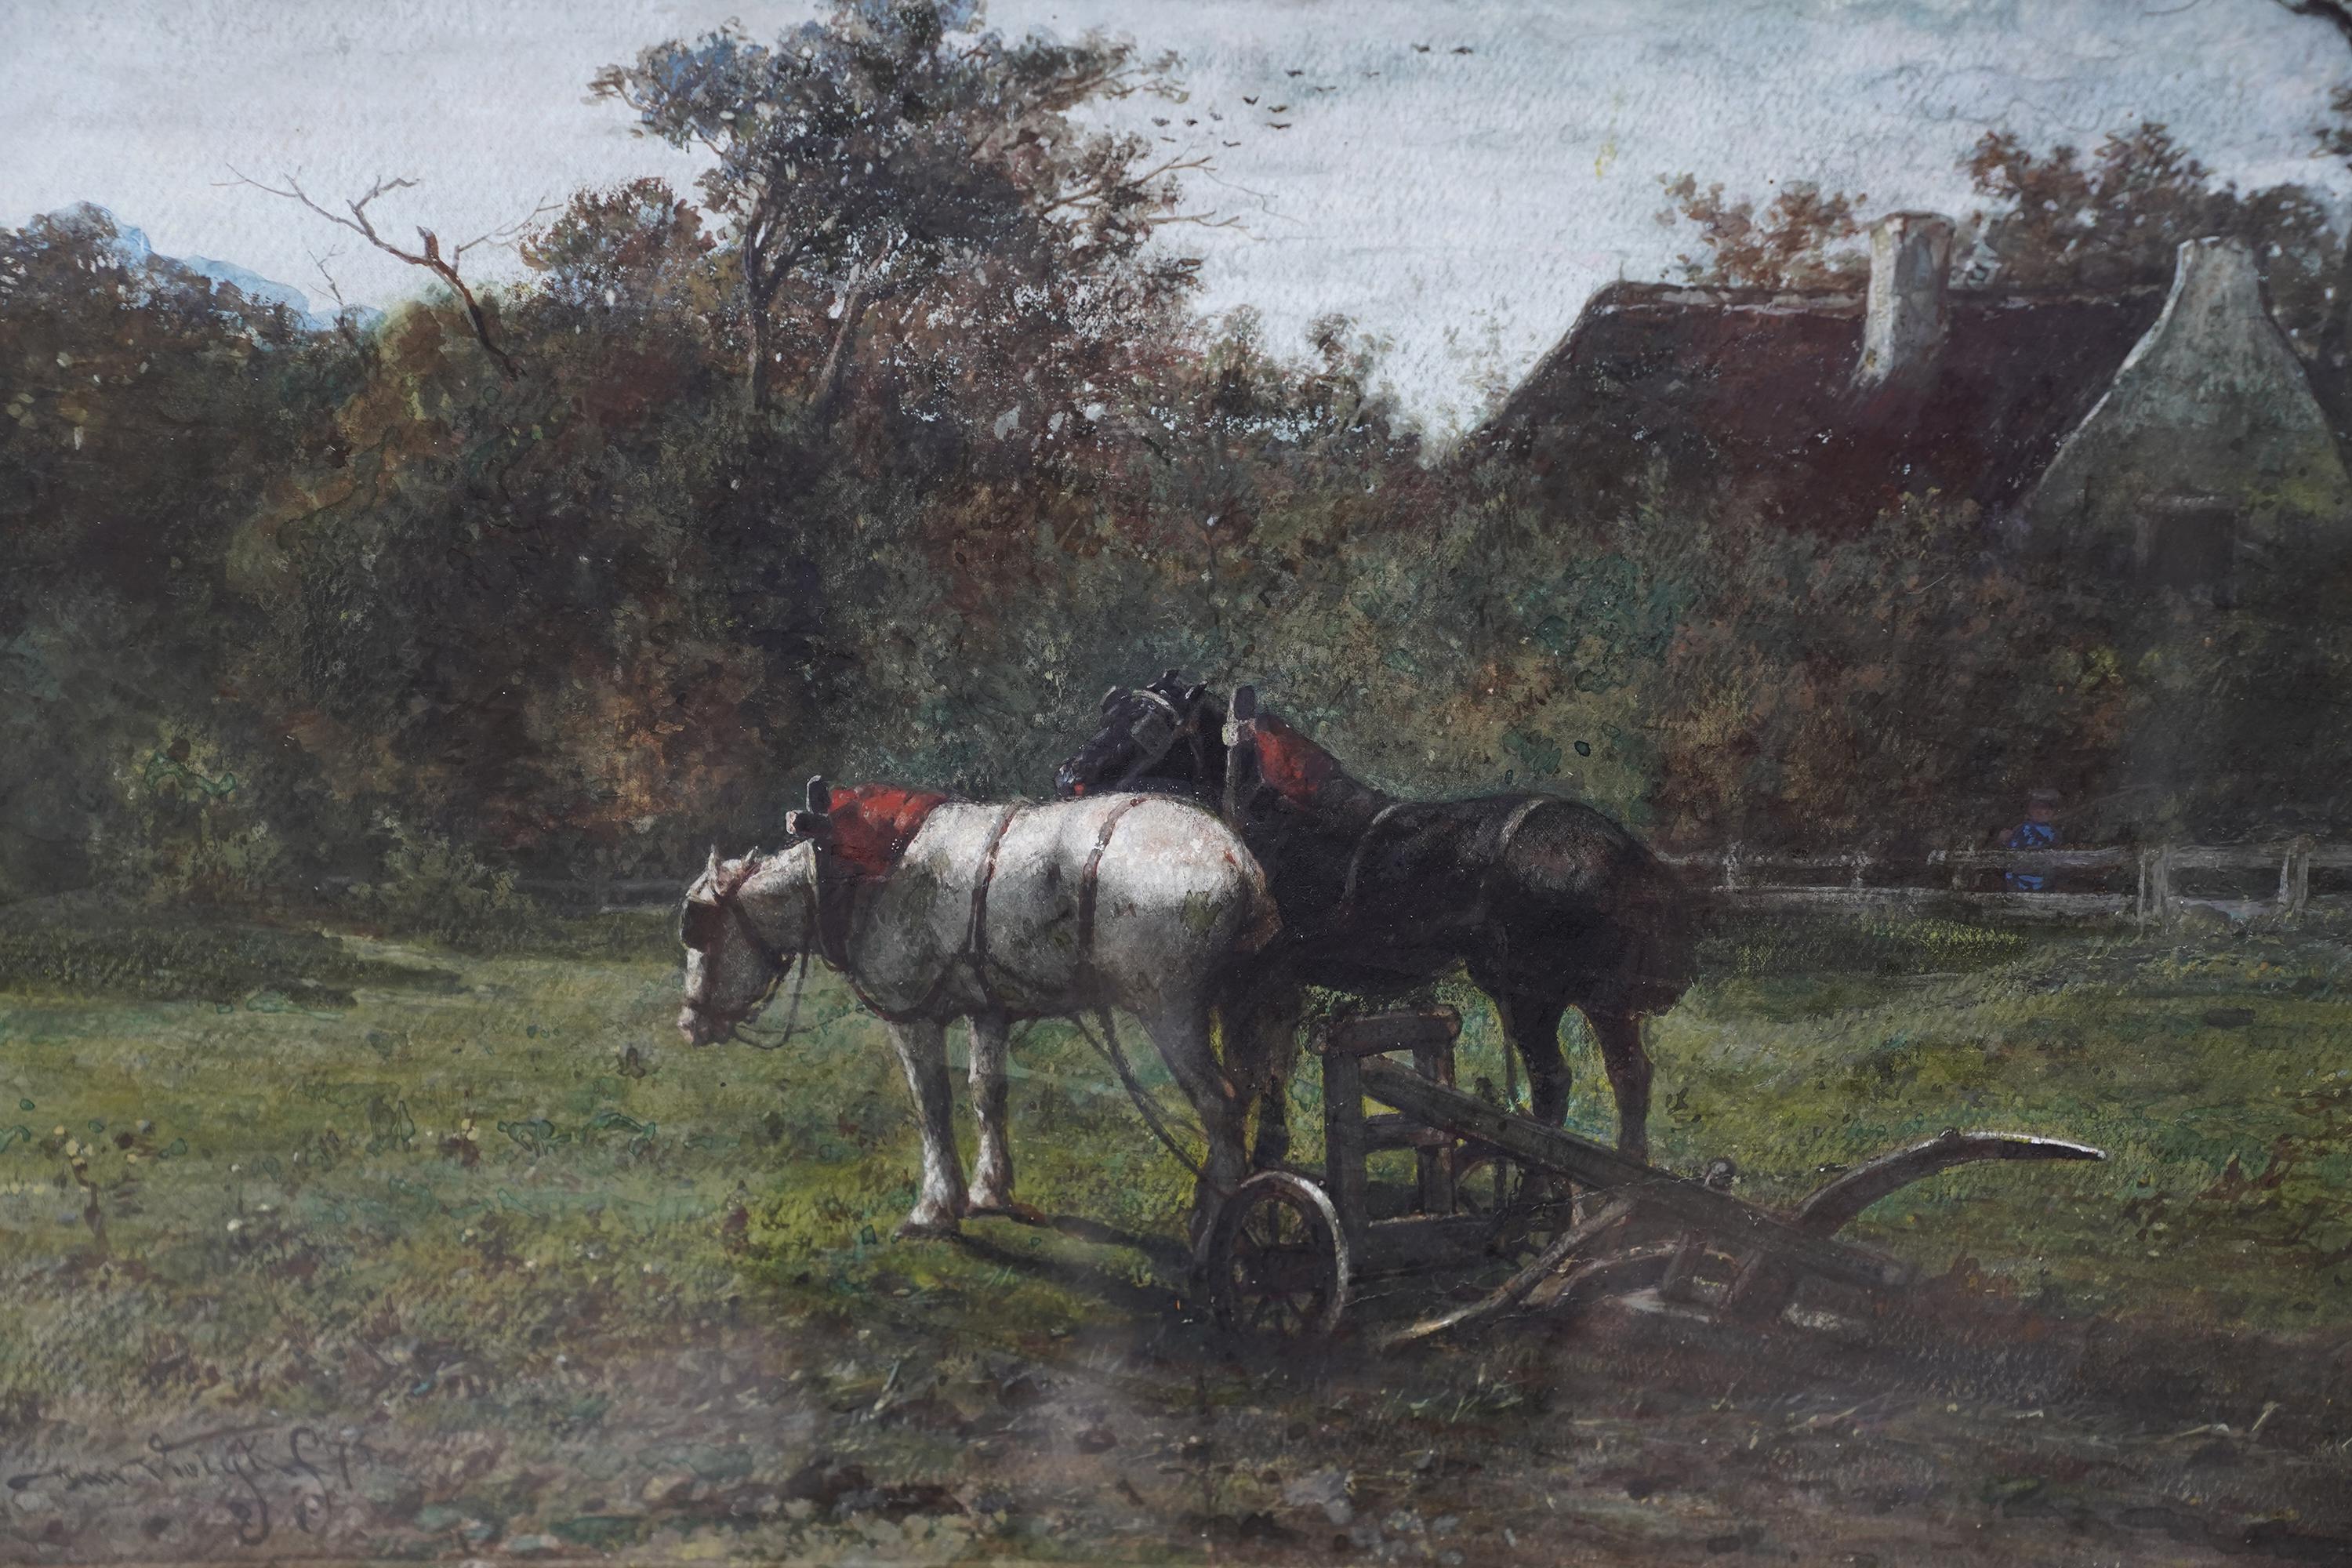 This lovely Victorian animal landscape watercolour painting is by Dutch artist Johannes Martinus Vrolyk or Vrolijk. Painted in 1875, the painting is of two working horses, one white one black in the foreground, having a mid-day rest from ploughing a